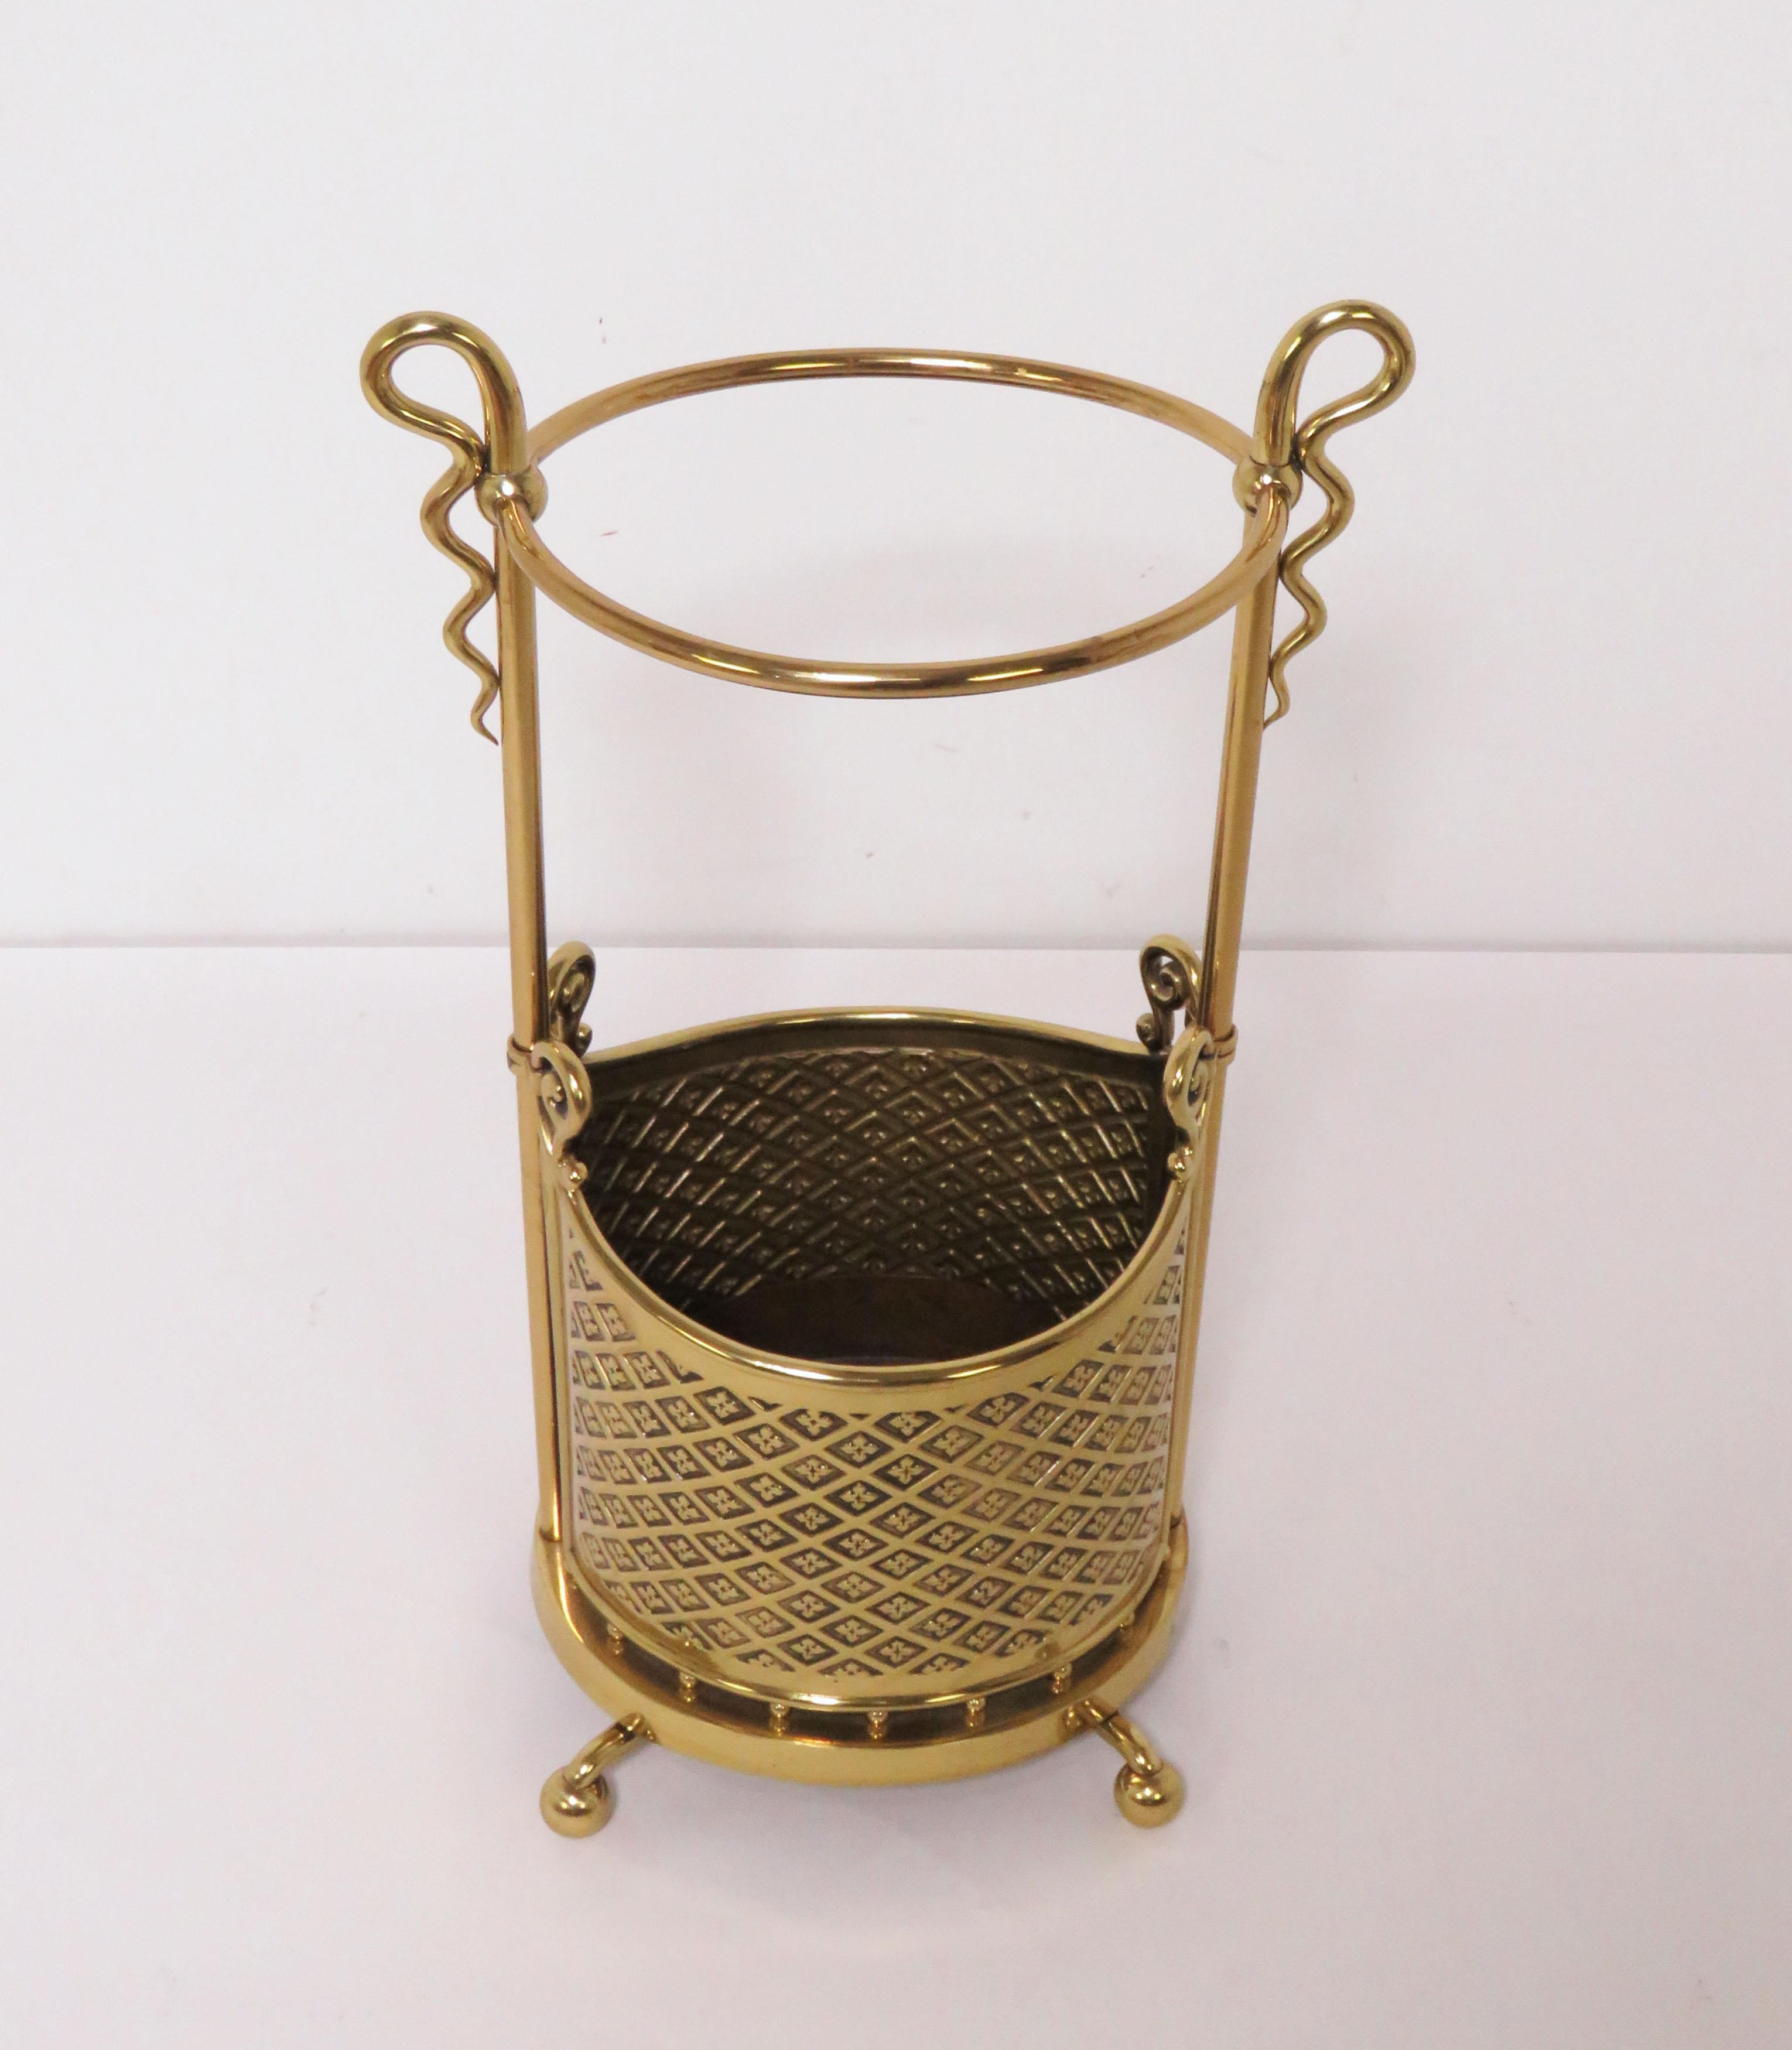 Marvellously unique umbrella stand in solid brass with decorative 